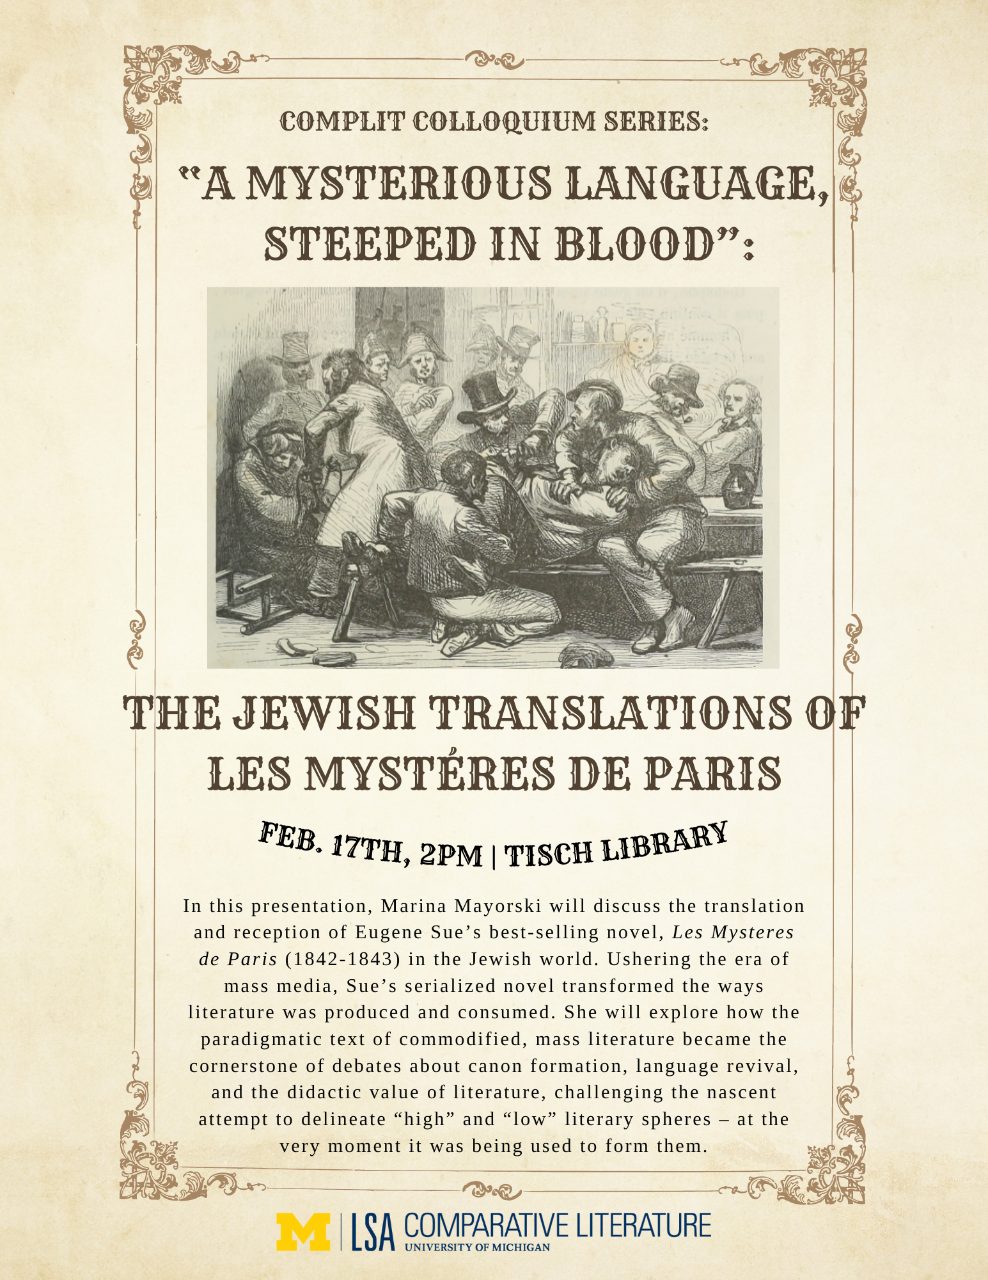 Text, “CompLit Colloquium Series: ‘A Mysterious Language Steeped in Blood’: The Jewish Translations of Les Mystères de Paris, February 17th, 2PM-Tisch Library. In this presentation, Marina Mayorski will discuss the translation and reception of Eugene Sue’s best-selling novel, Les Mystères de Paris (1842-1843) in the Jewish world. Ushering the era of mass media, Sue’s serialized novel transformed the ways literature was produced and consumed. She will explore how the paradigmatic text of commodified, mass literature became the cornerstone of ebates about canon formation, language revival, and the didactic value of literature, challenging the nascent attempt to delineate “high” and “low” literary spheres - at the very moment it was being used to form them”